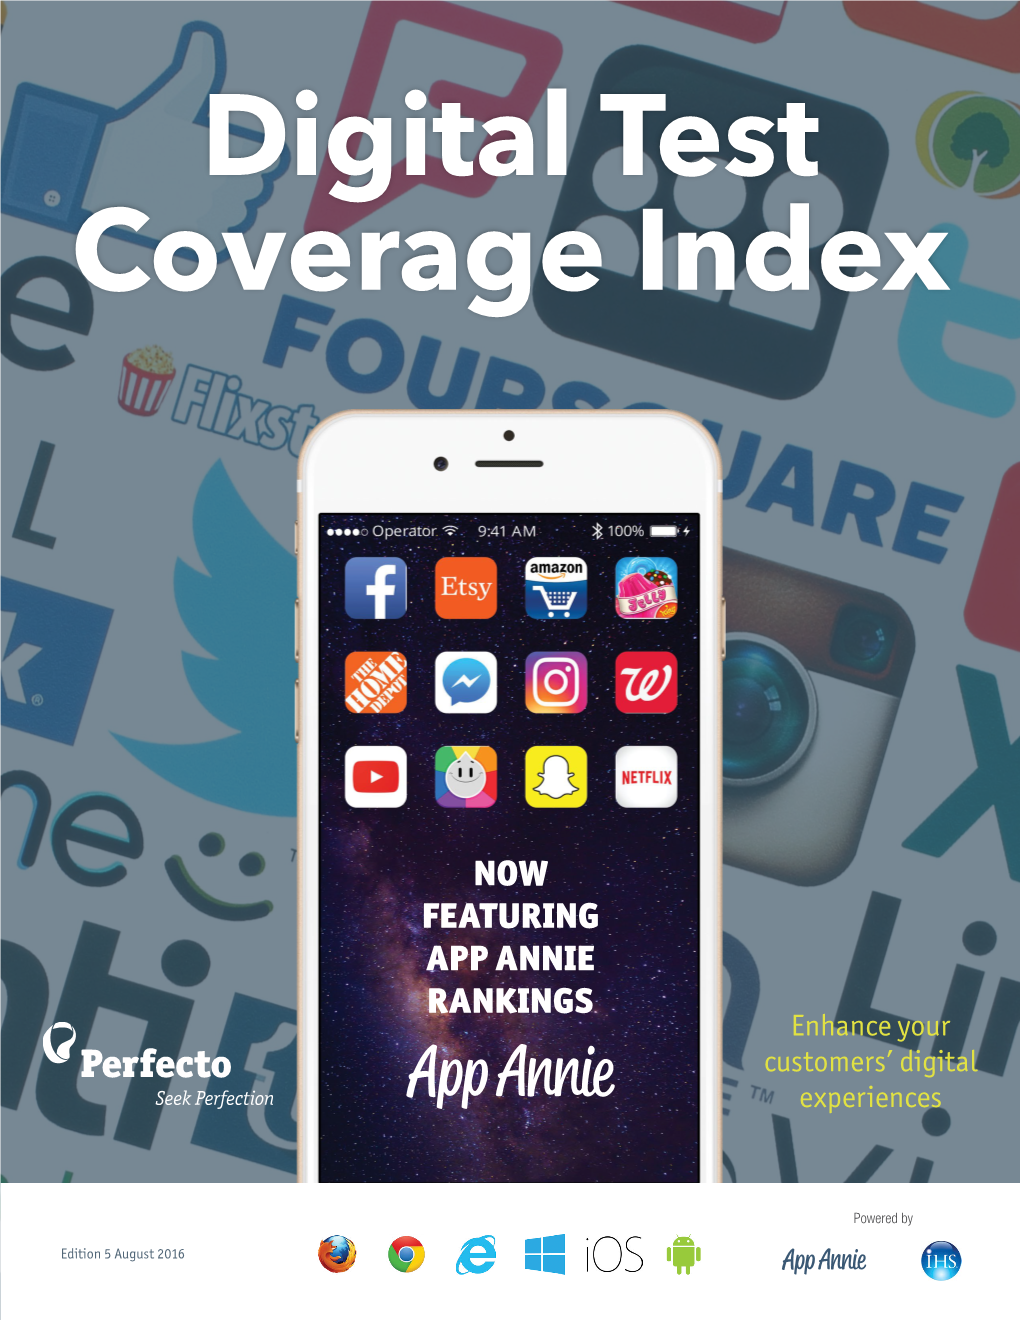 NOW FEATURING APP ANNIE RANKINGS Enhance Your Customers’ Digital Experiences